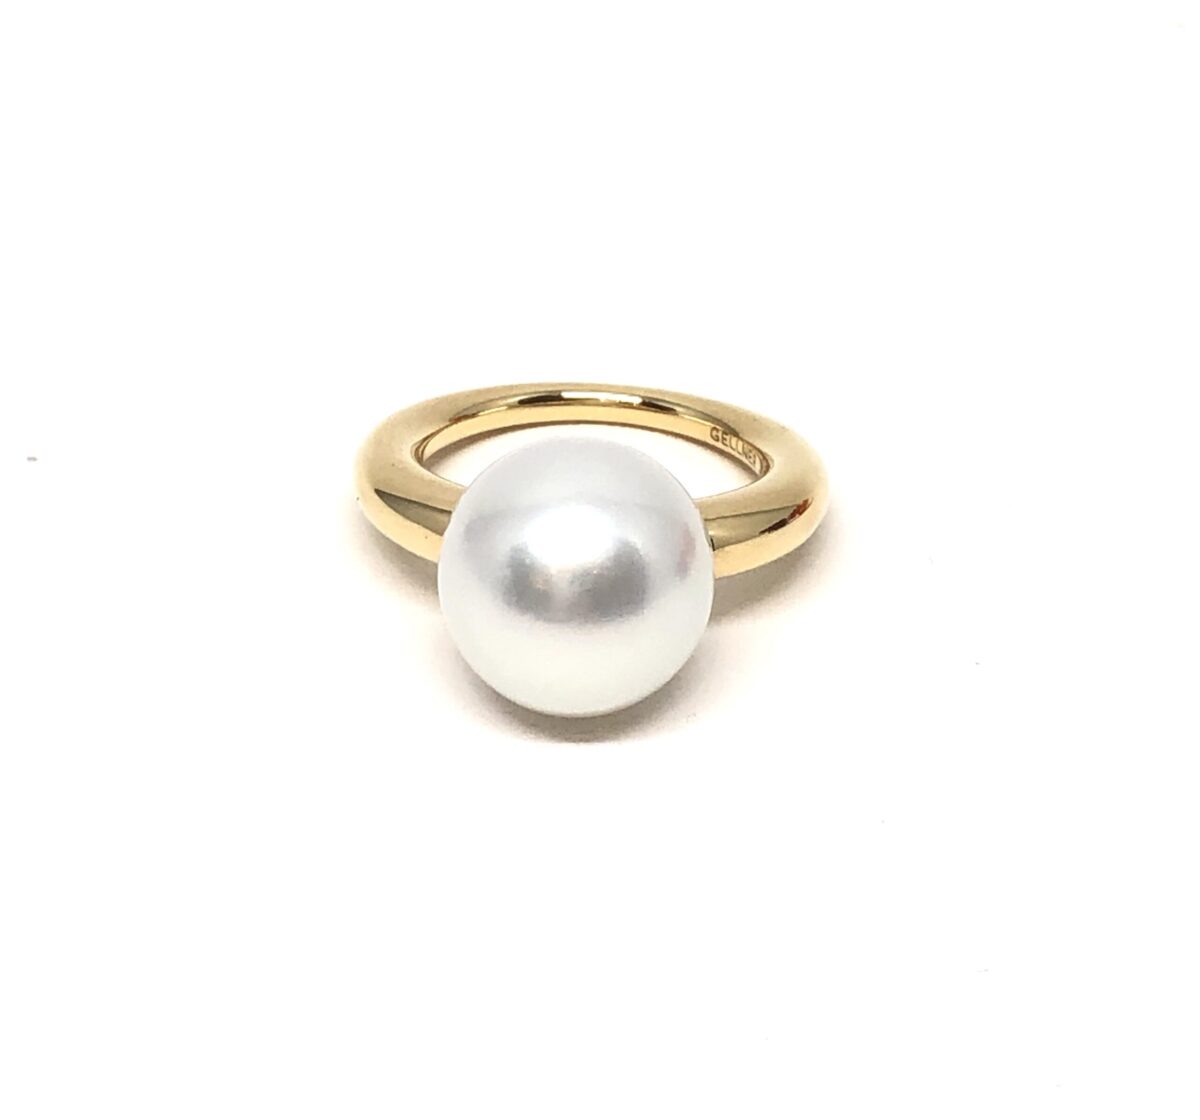 Yellow Gold South Sea Pearl Ring